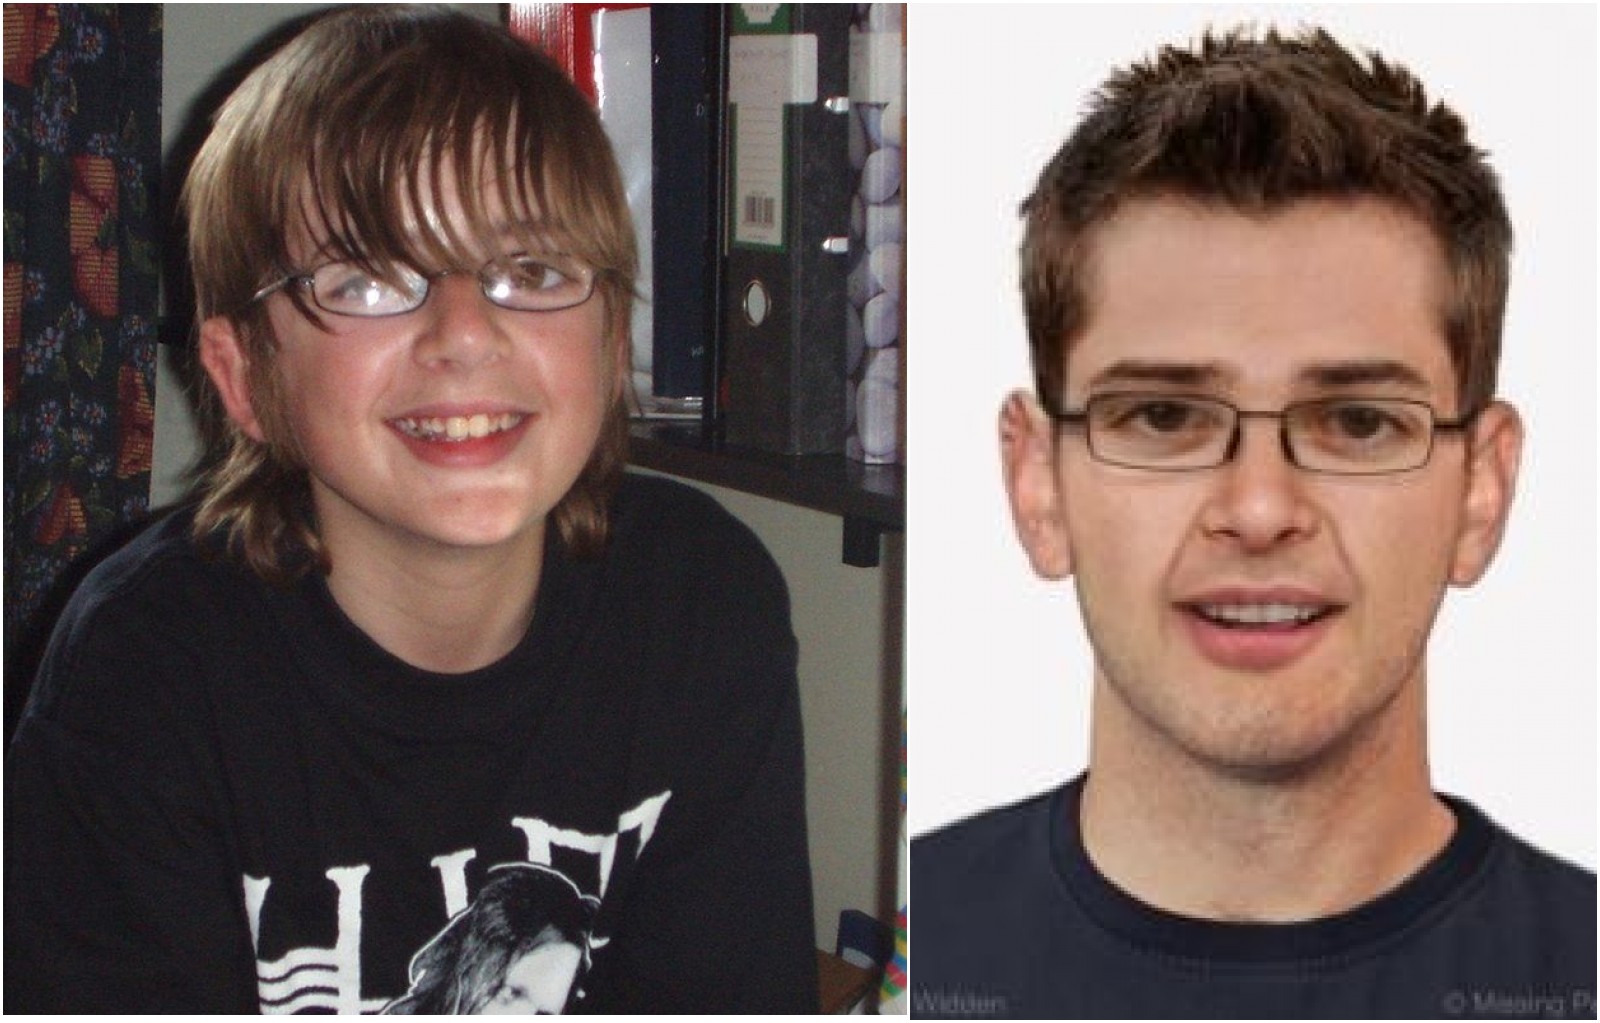 A 15year mystery What do we know about Andrew Gosden's disappearance